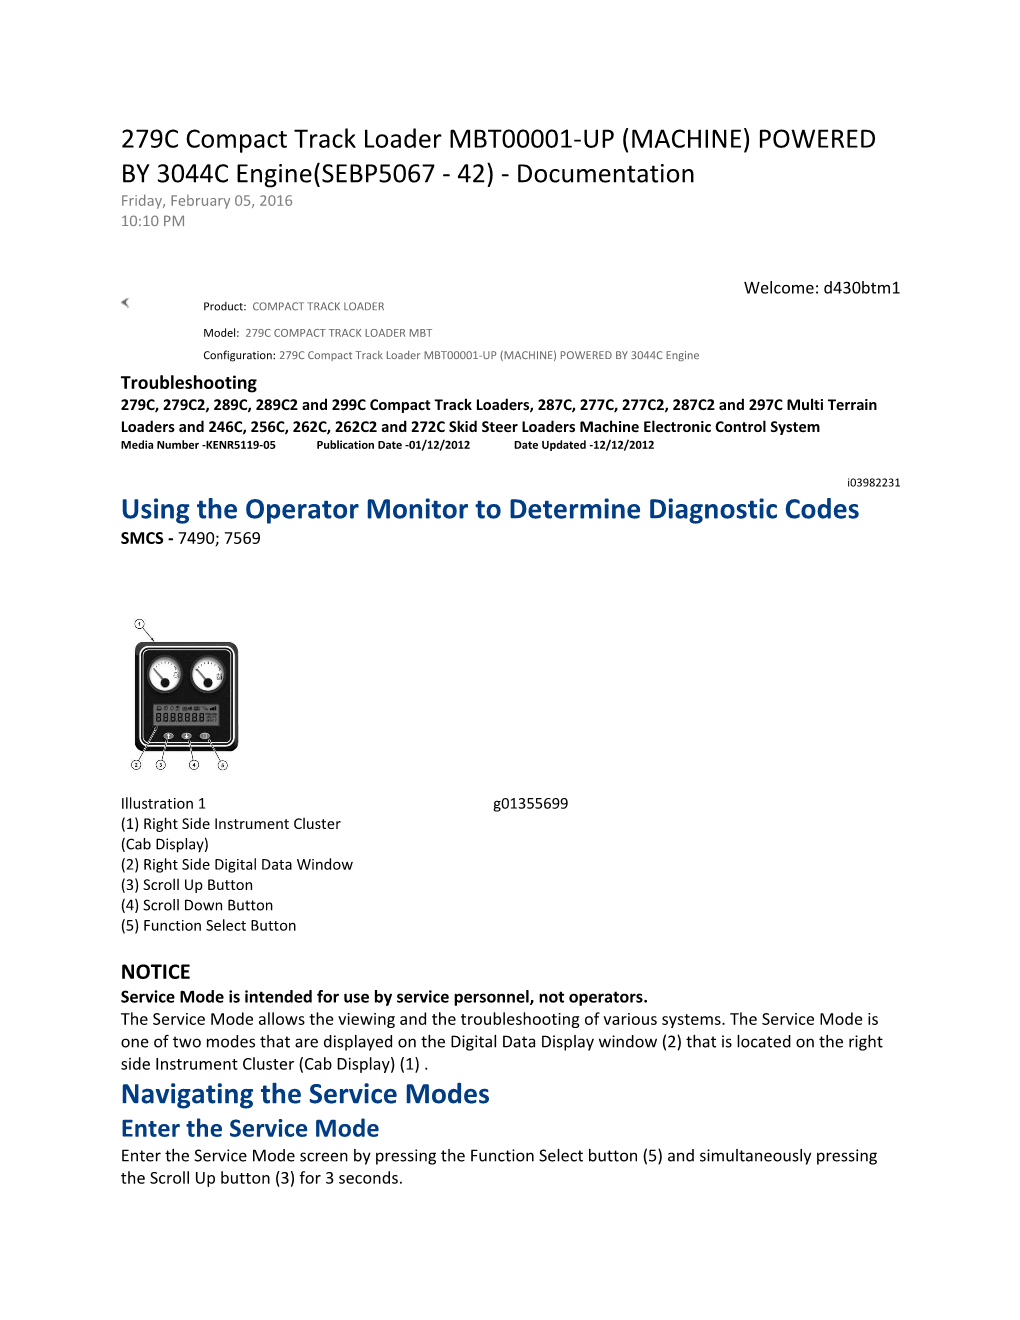 Using the Operator Monitor to Determine Diagnostic Codes